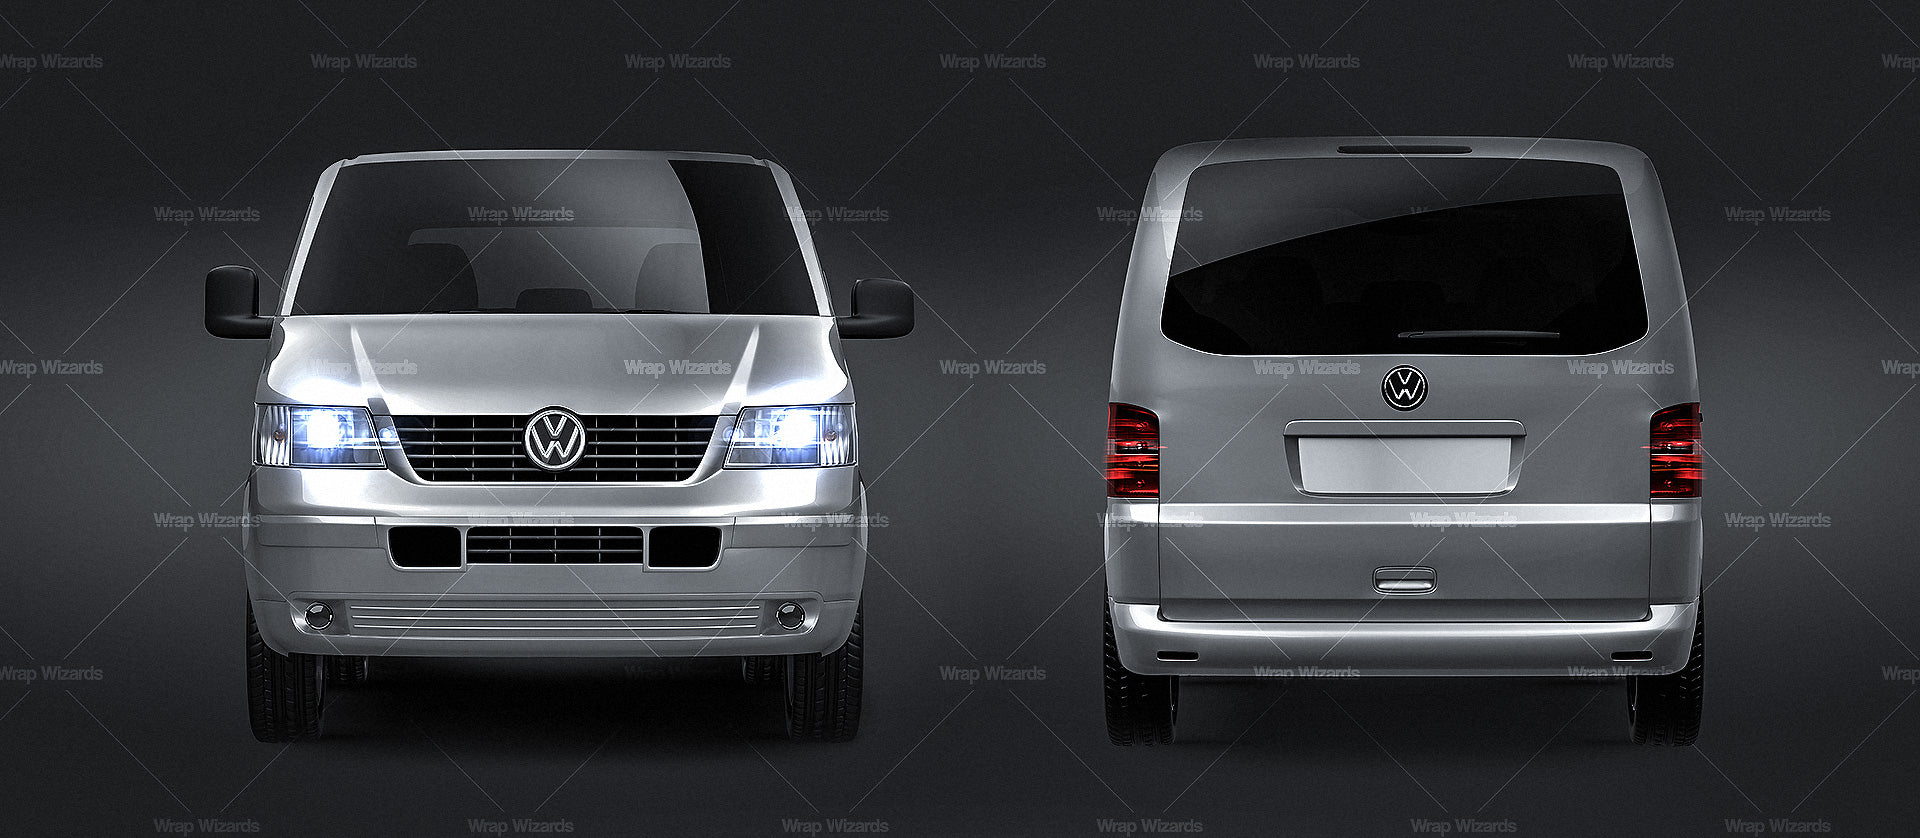 Volkswagen Transporter T5 glossy finish - all sides Car Mockup Template.psd